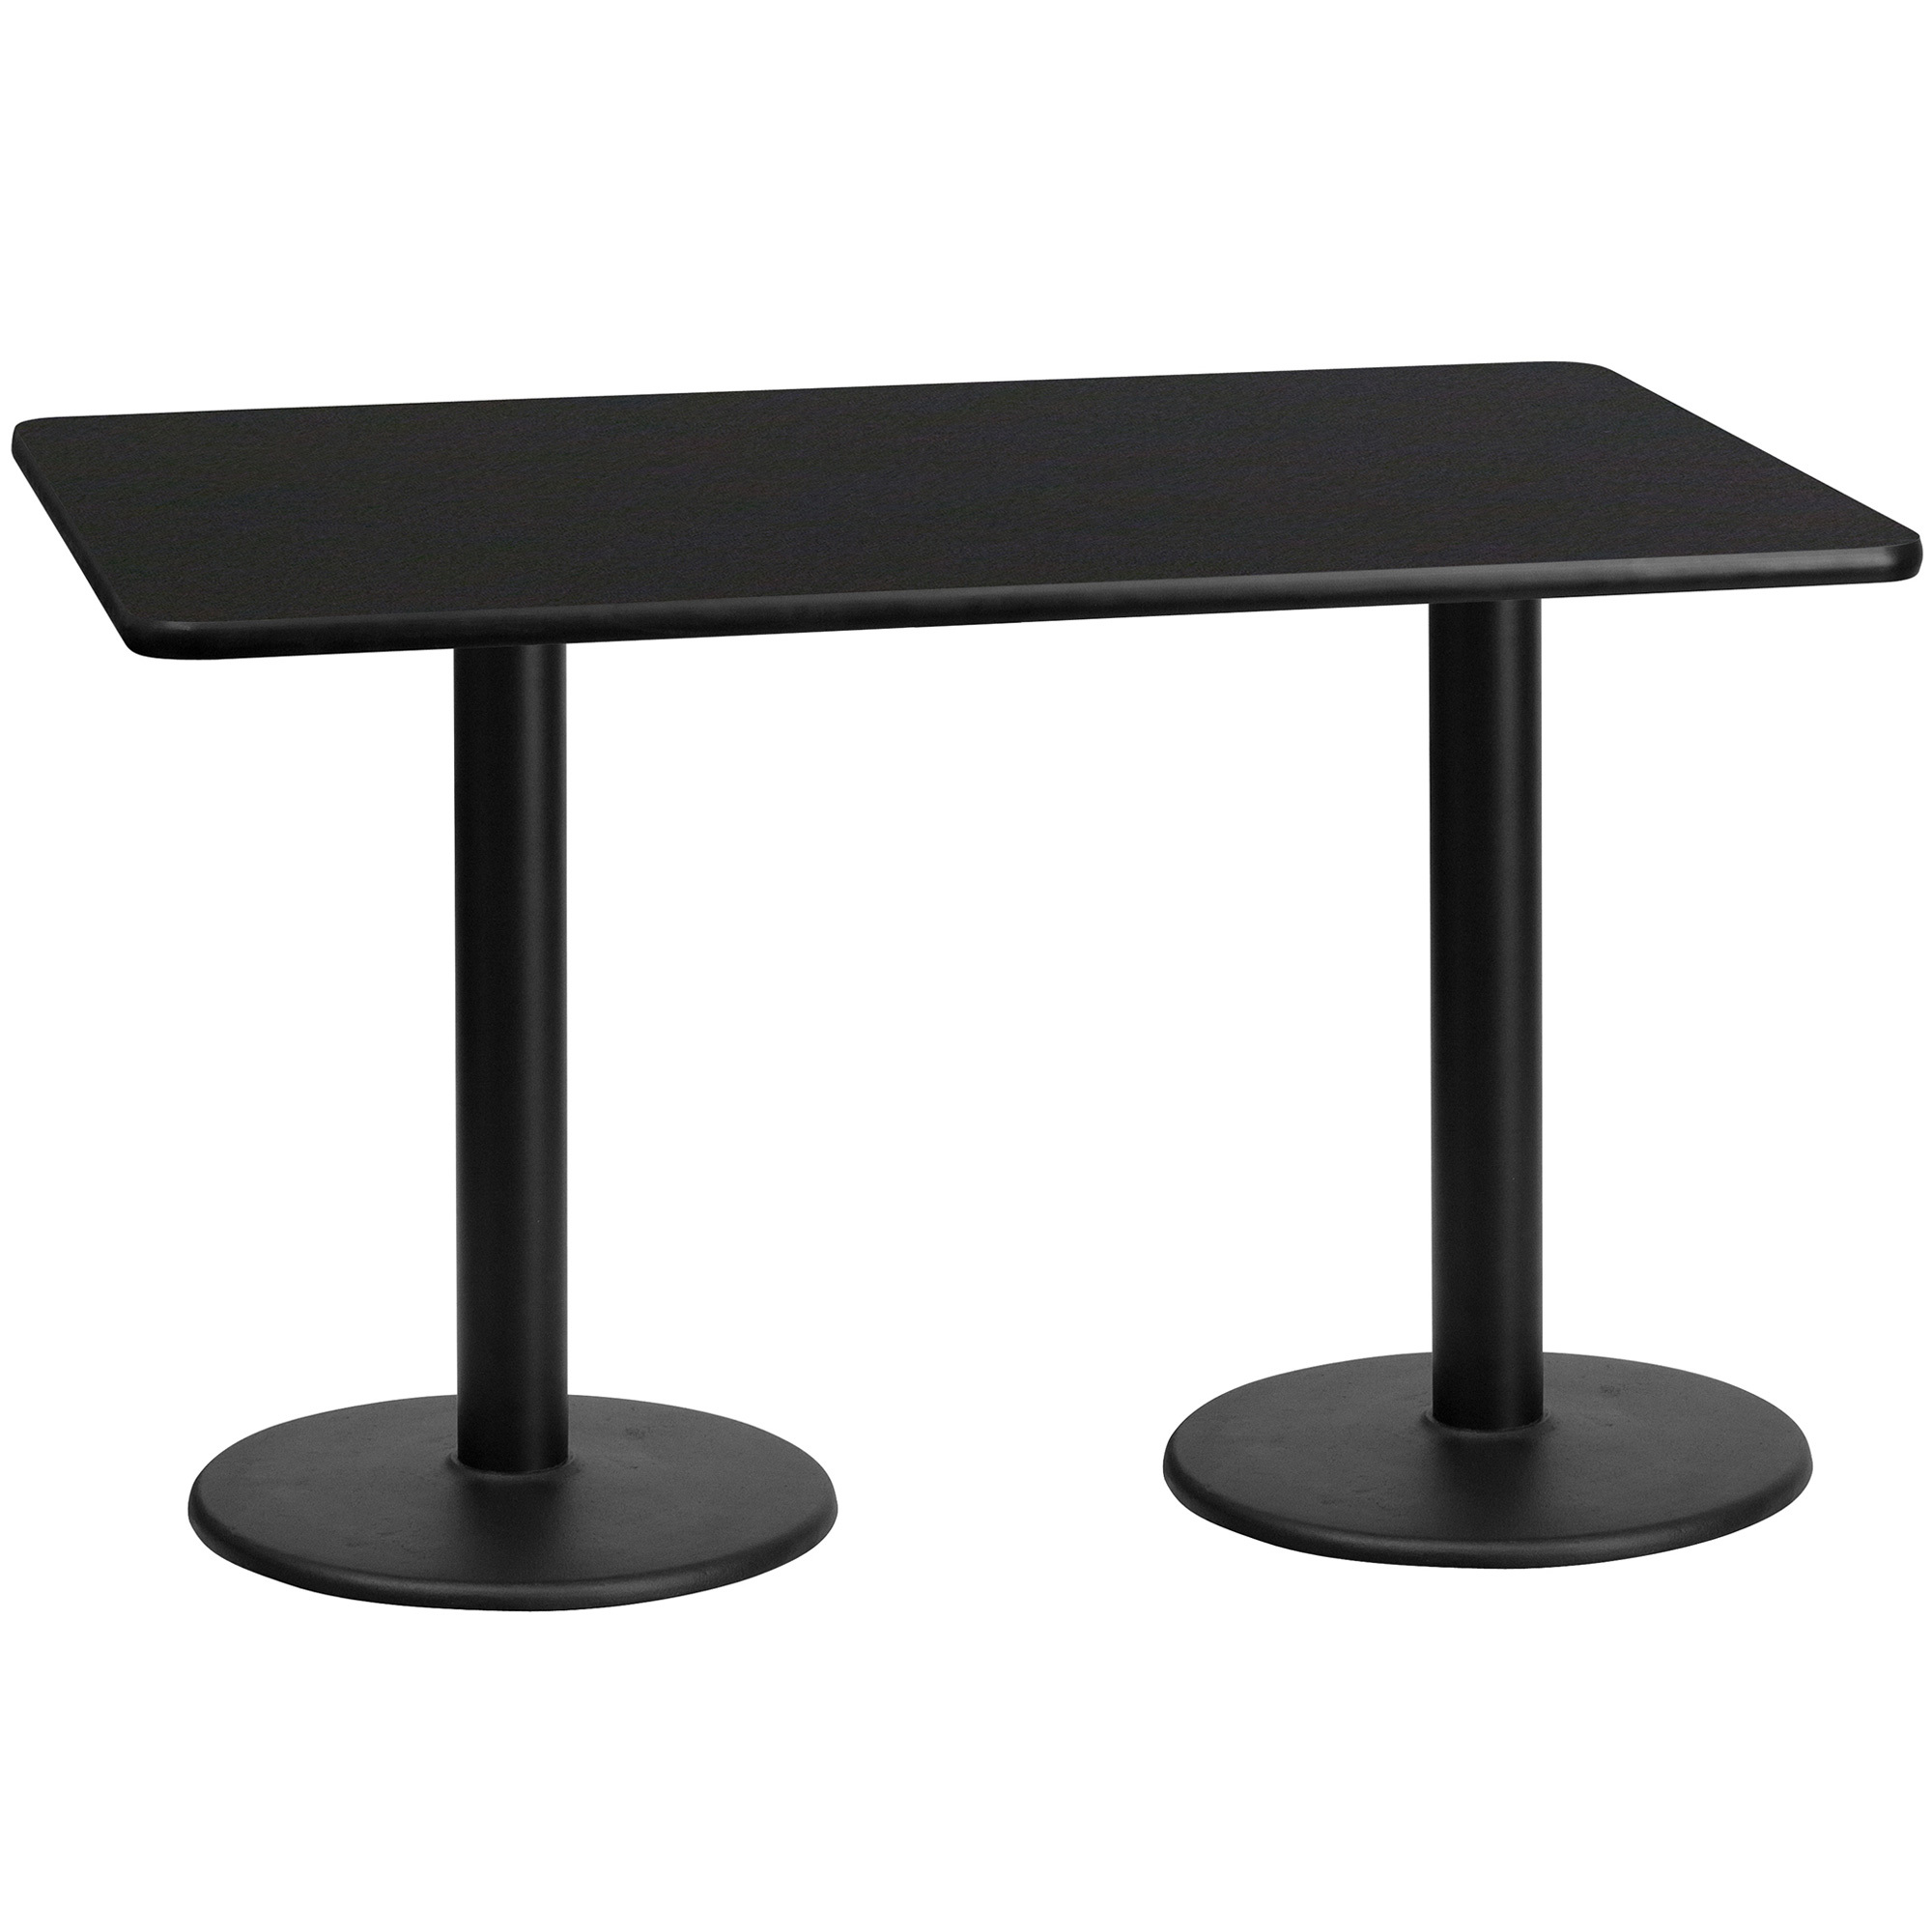 60Inch L x 30Inch W Table with Laminate Top and Round Base — Reversible Black/Mahogany Top, Model - Flash Furniture XUBK3060TR18